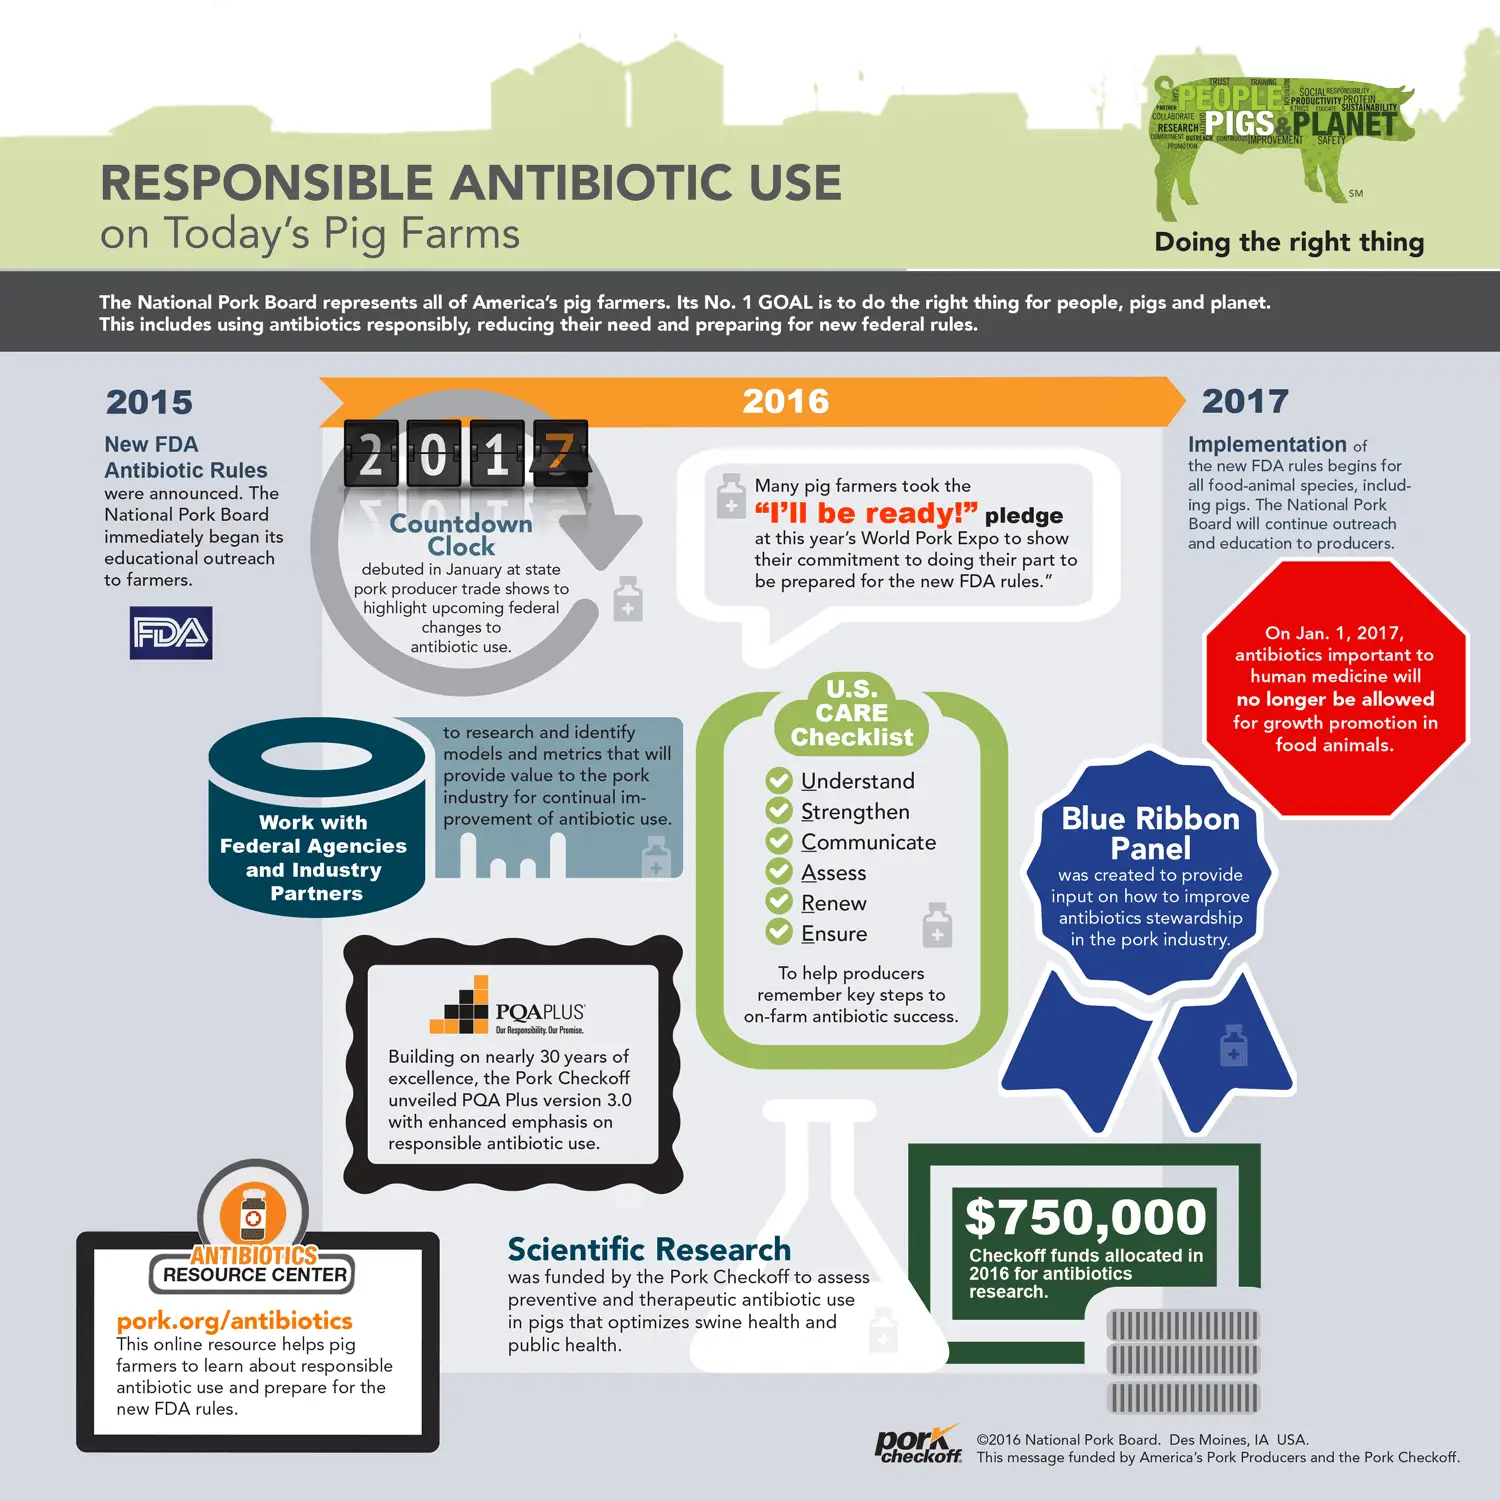 Responsible Antibiotic Use on Today